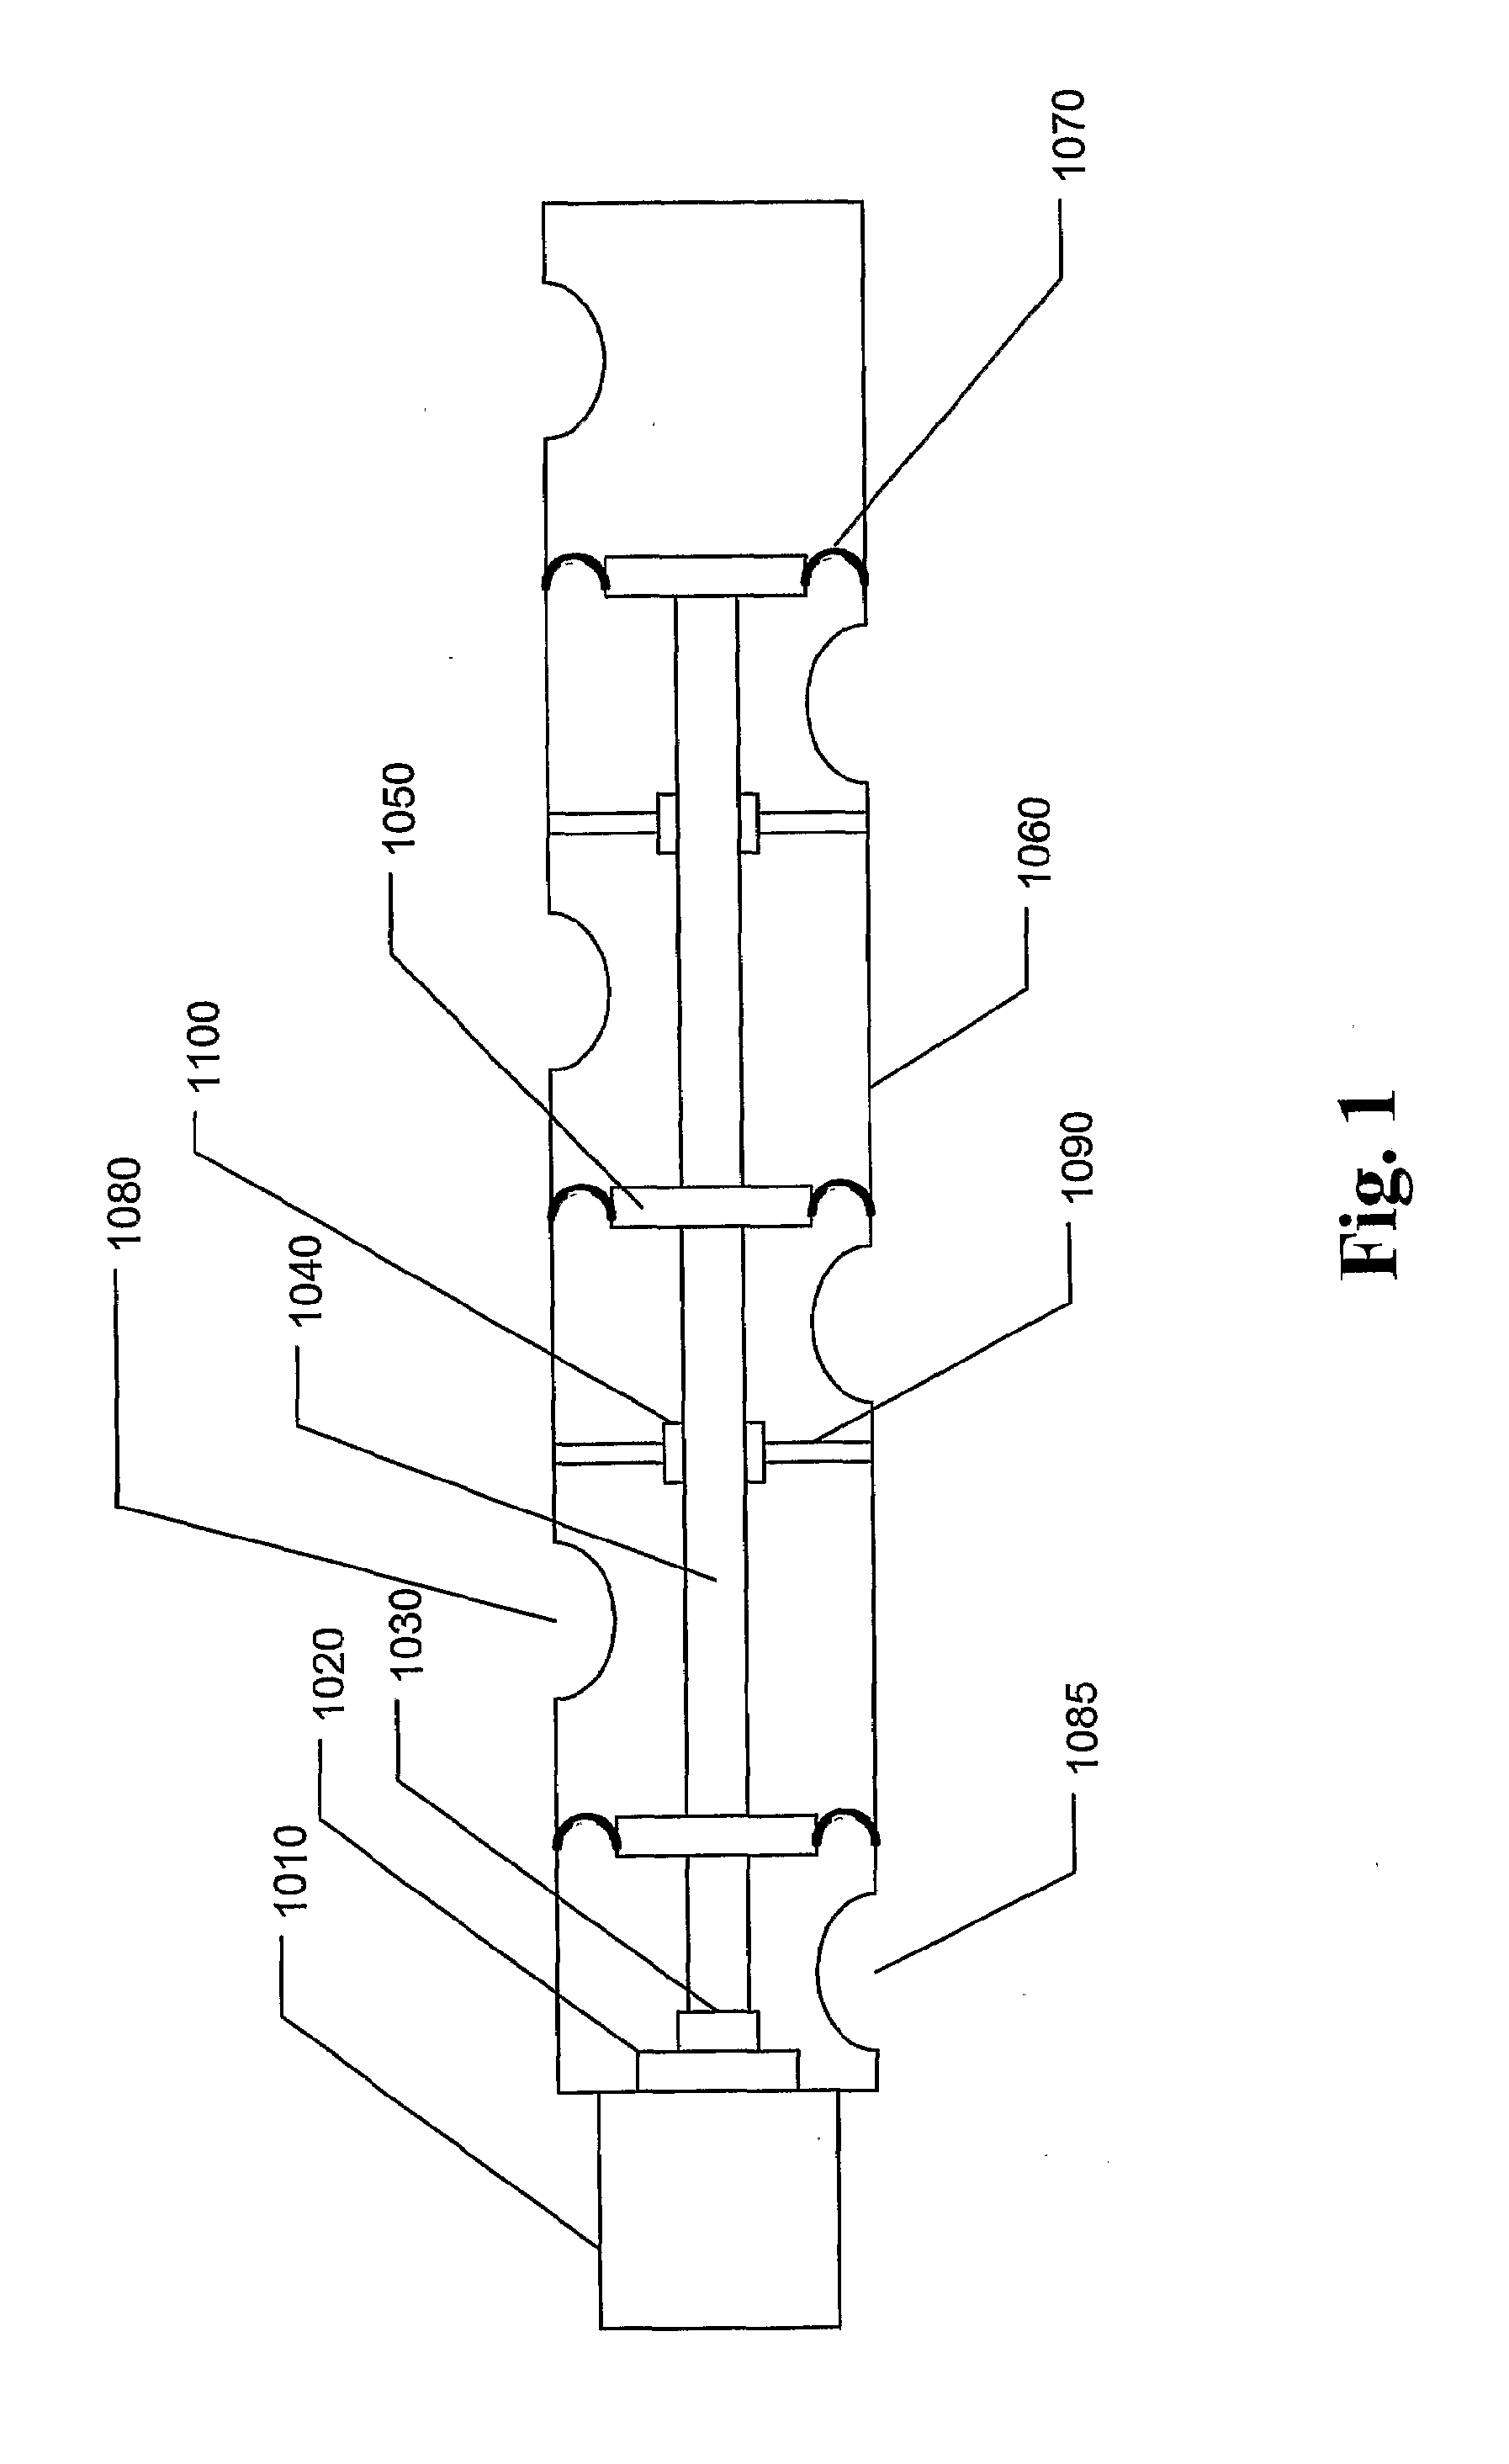 Acoustic transducer comprising a plurality of coaxially arranged diaphragms